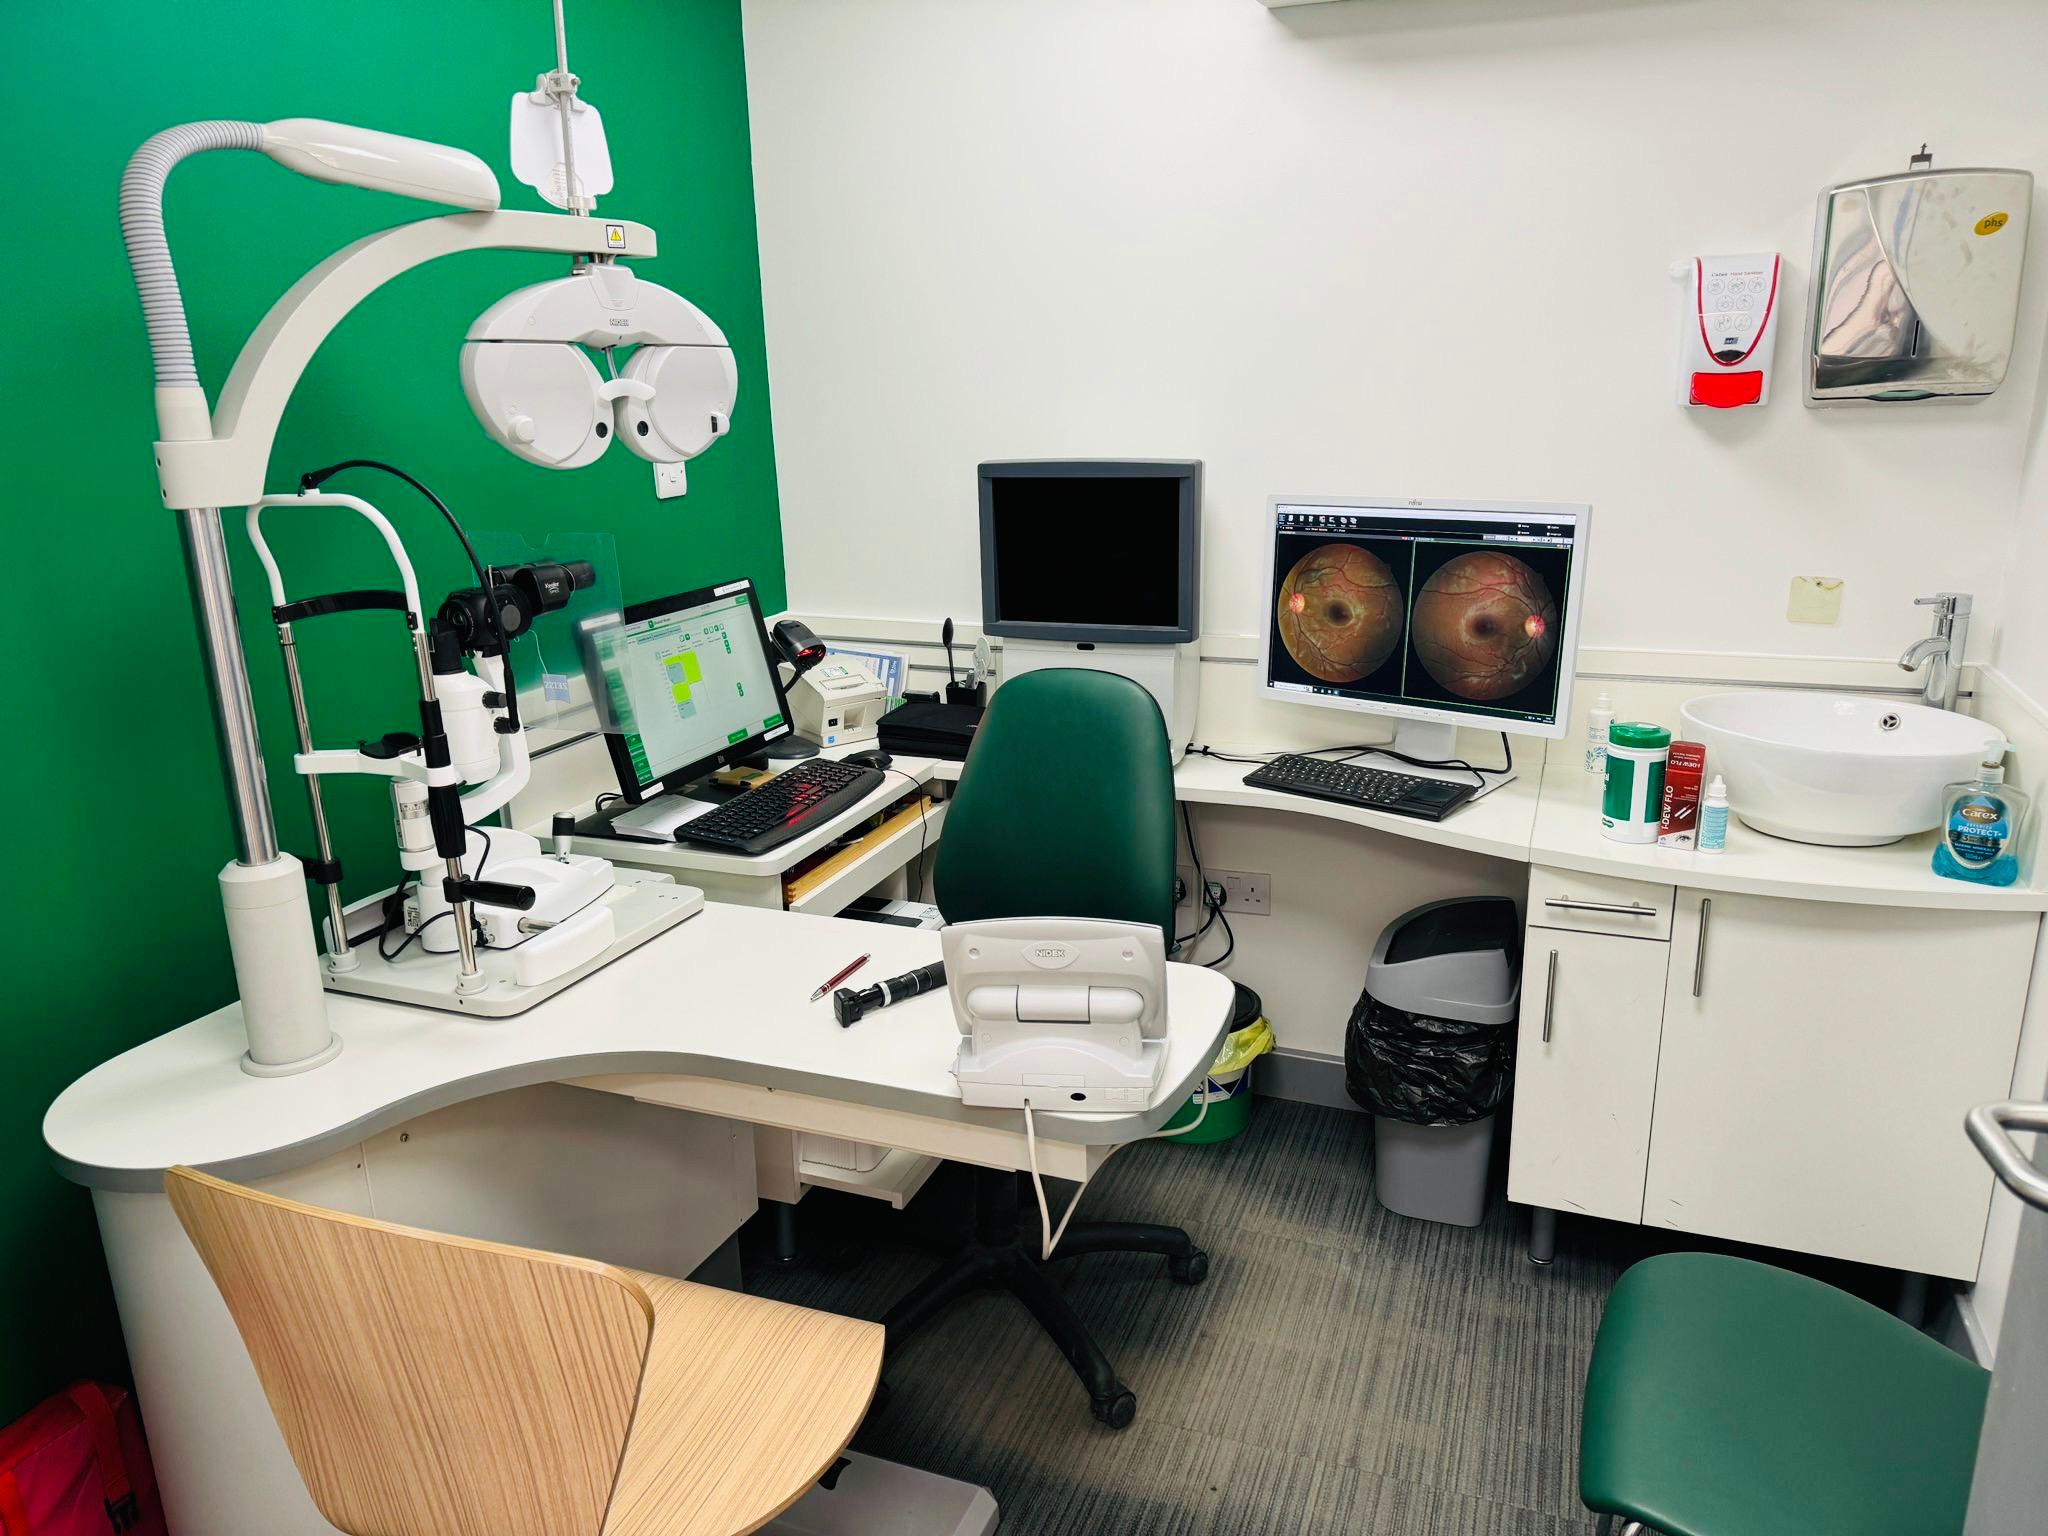 Images Specsavers Opticians and Audiologists - London Colney